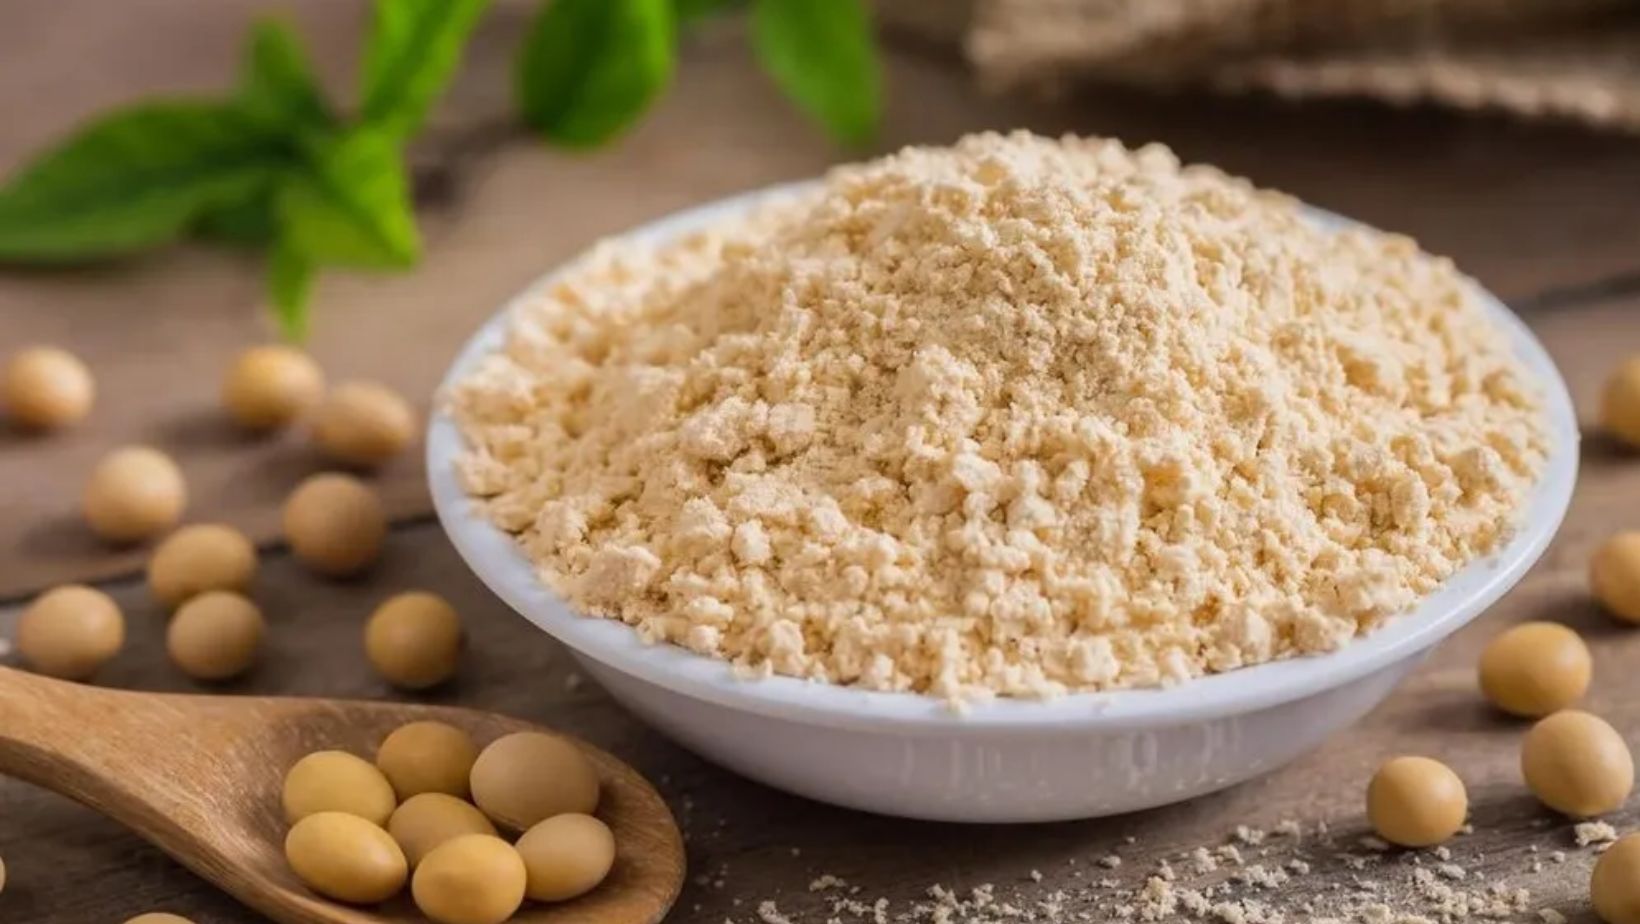 A Guide to Soy Protein Concentrate